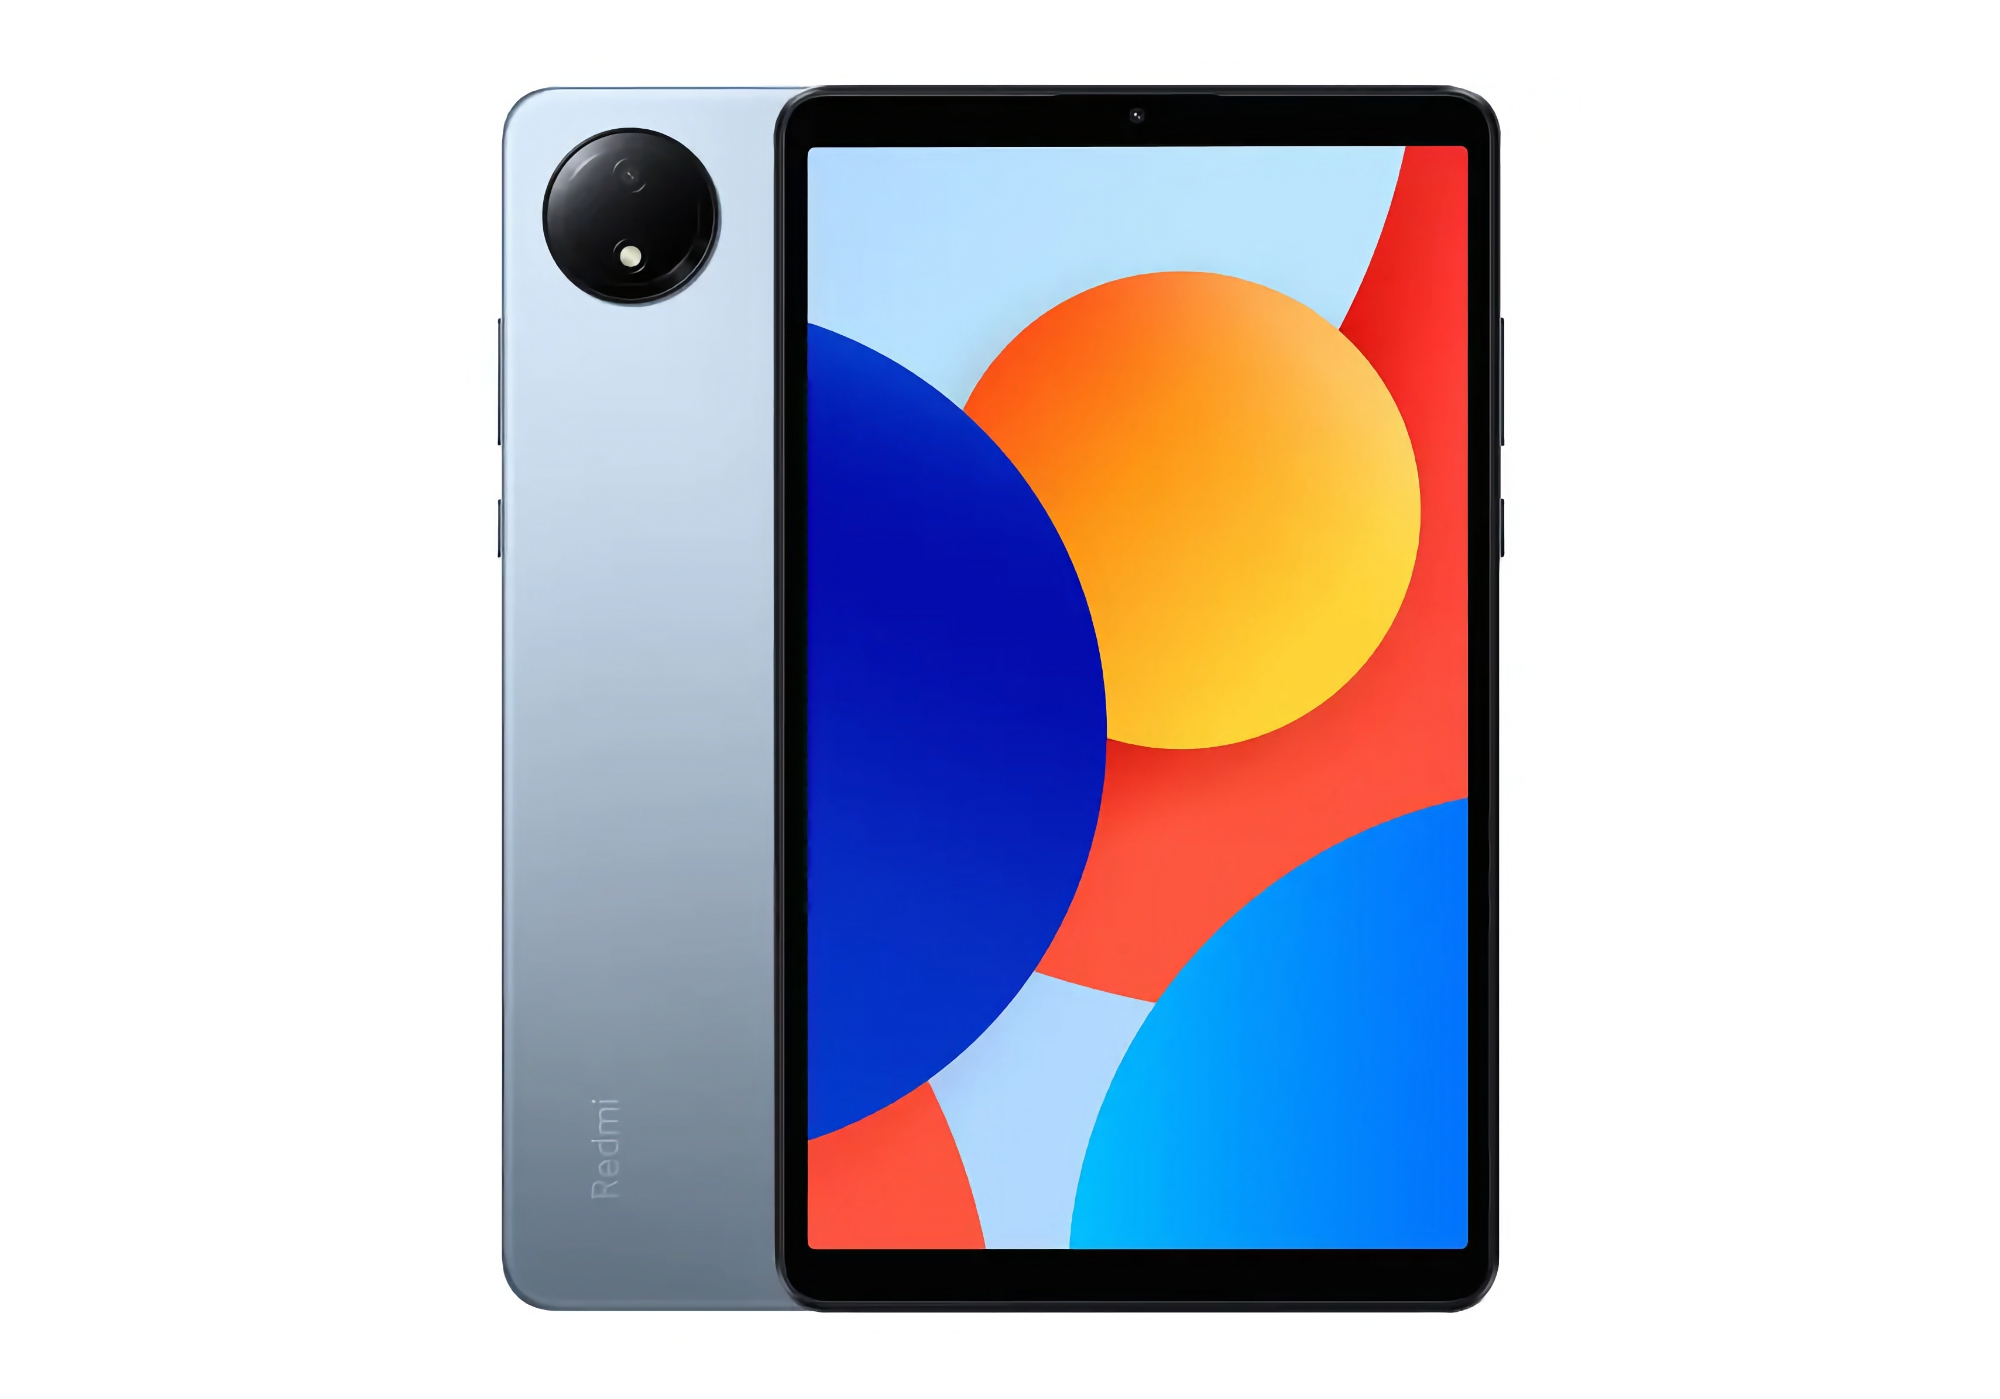 90Hz display, MediaTek Helio G85 chip, dual cameras, stereo speakers and a 6650mAh battery: an insider has published detailed specifications of the Redmi Pad SE 8.7